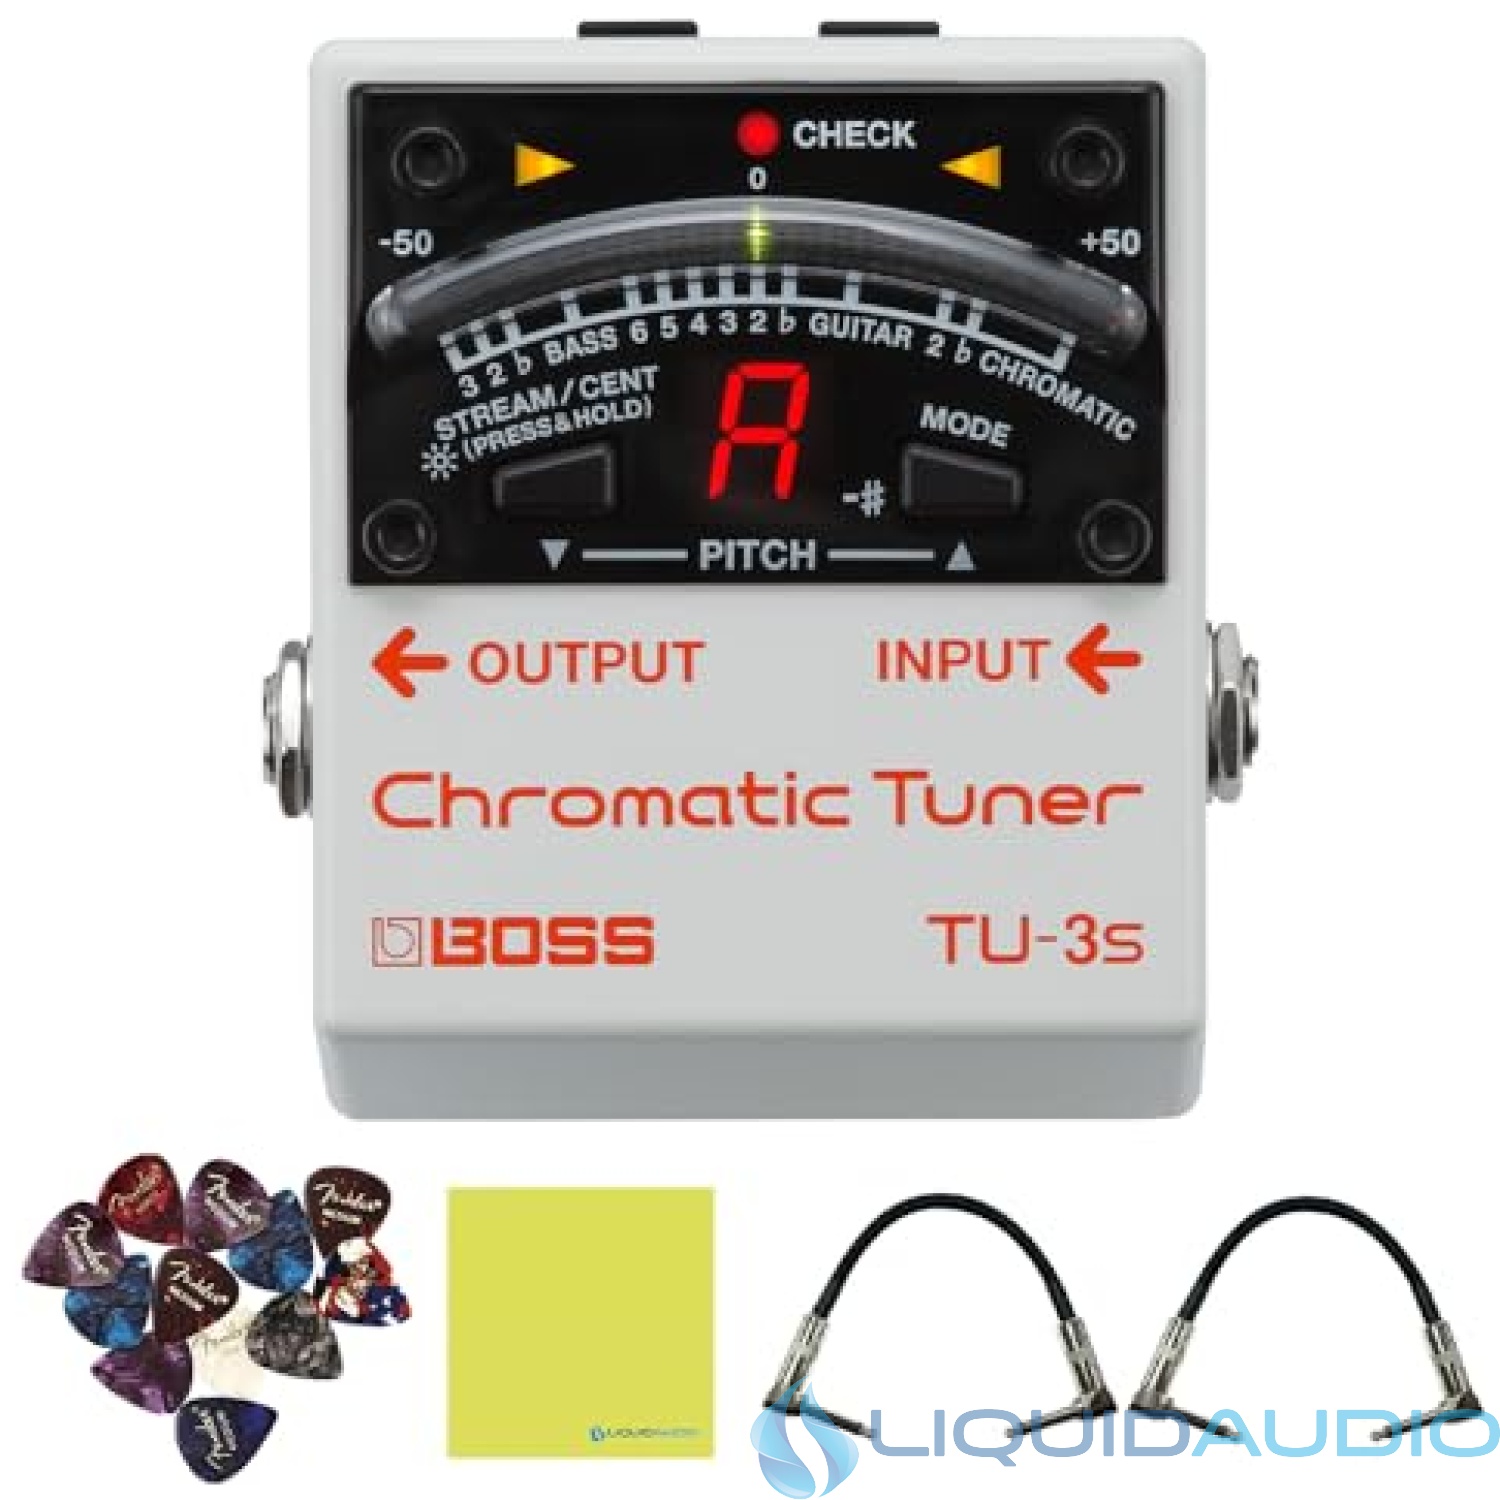 Boss TU-3S Chromatic Tuner Pedal Bundle w/2x Strukture S6P48 Woven Right Angle Patch Cables, 12x Guitar Picks and Liquid Audio Polishing Cloth